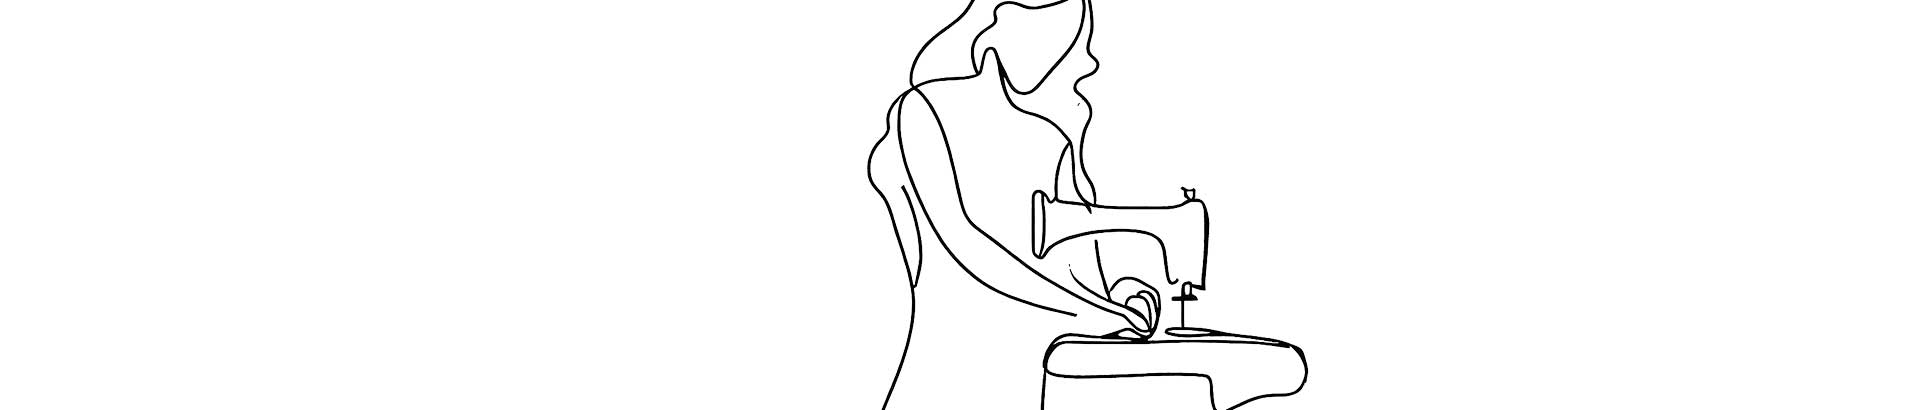 Line drawing of a skilled seamstress meticulously crafting a THREE Duvets partner duvet.